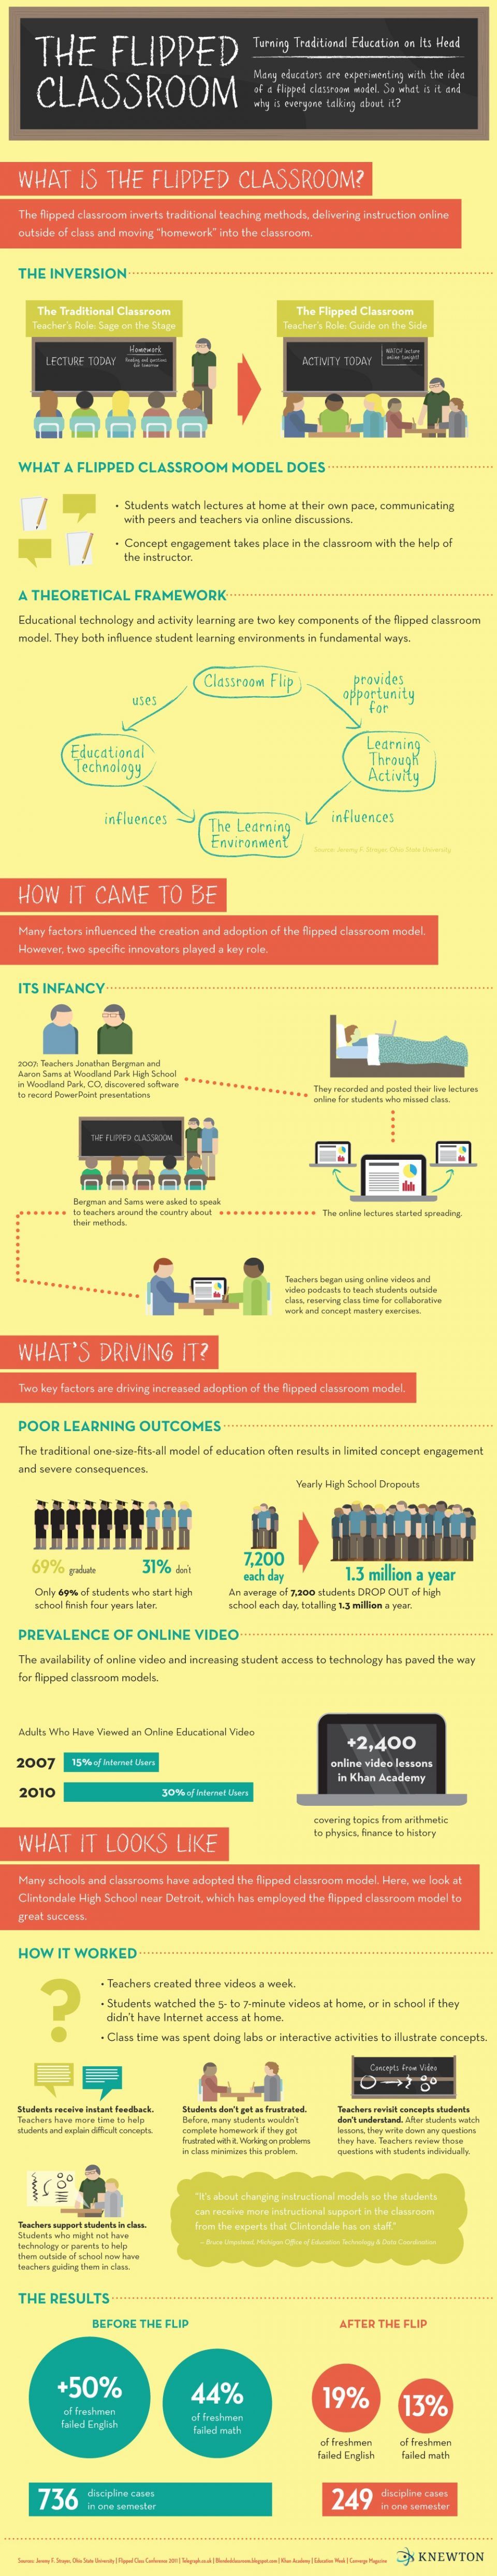 Infographic:The Flipped Classroom